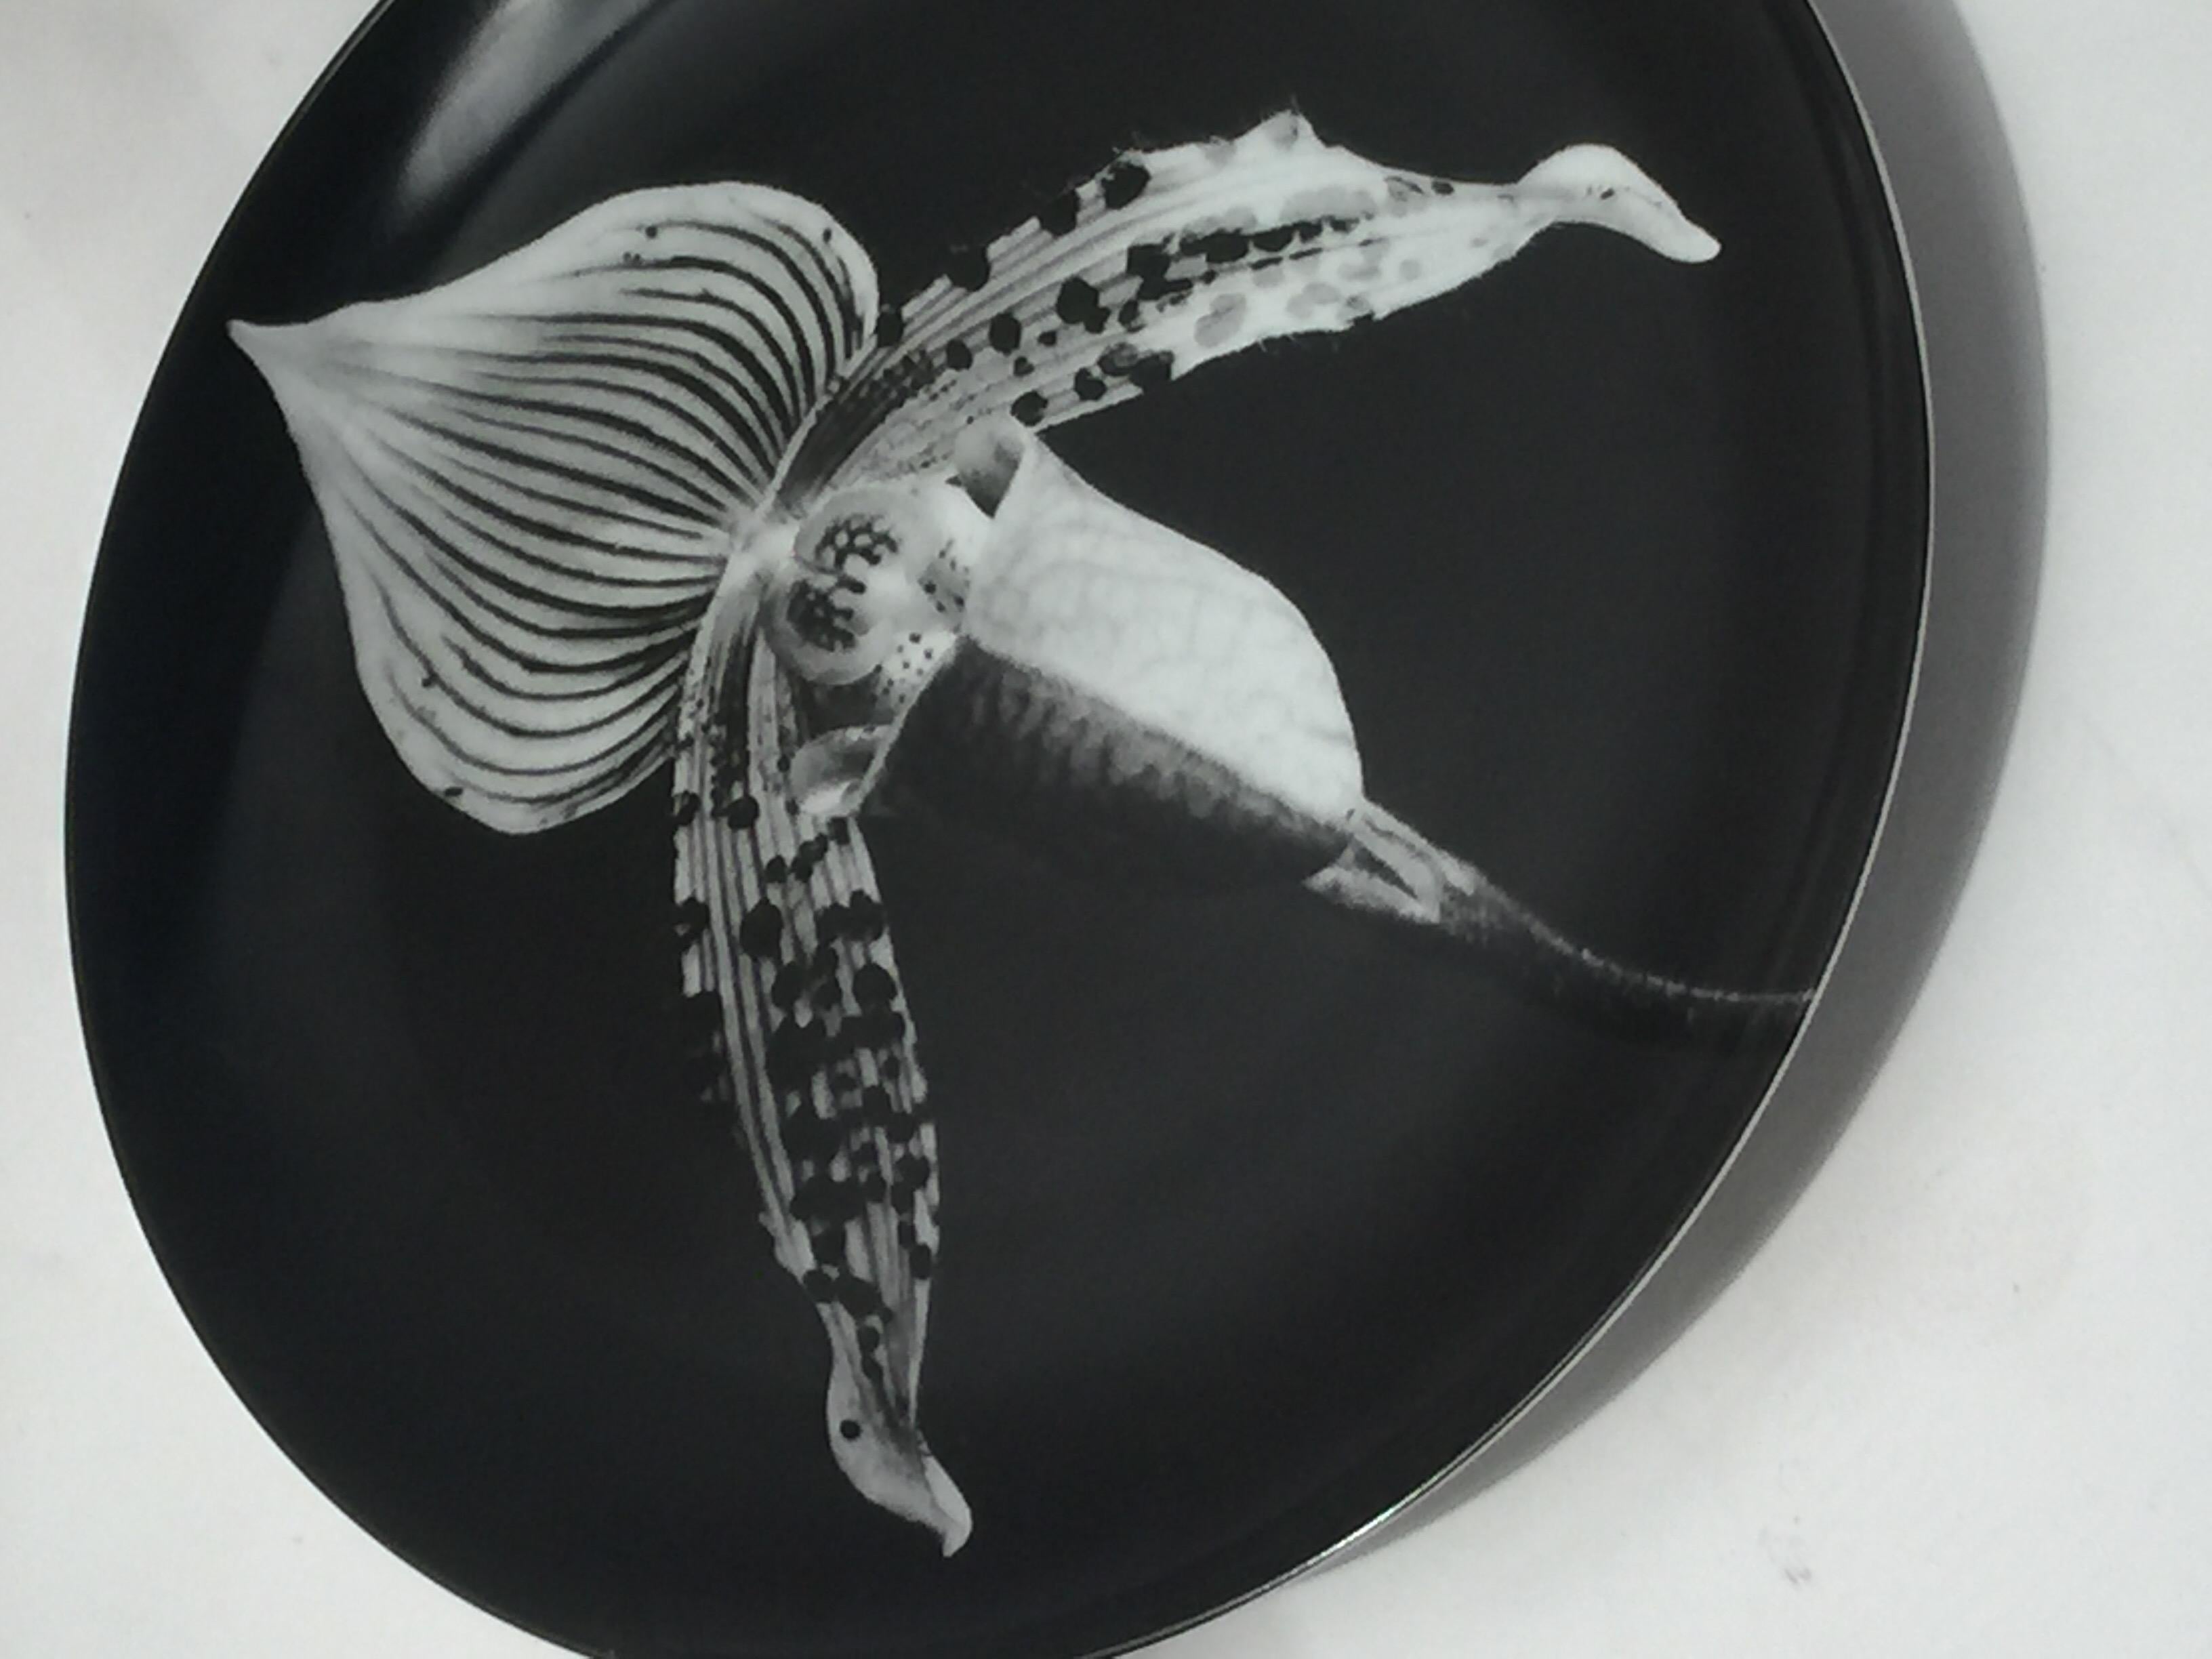 Swid Powell plate featuring photography from Robert Mapplethorpe. This features a black and white close up of an orchid.